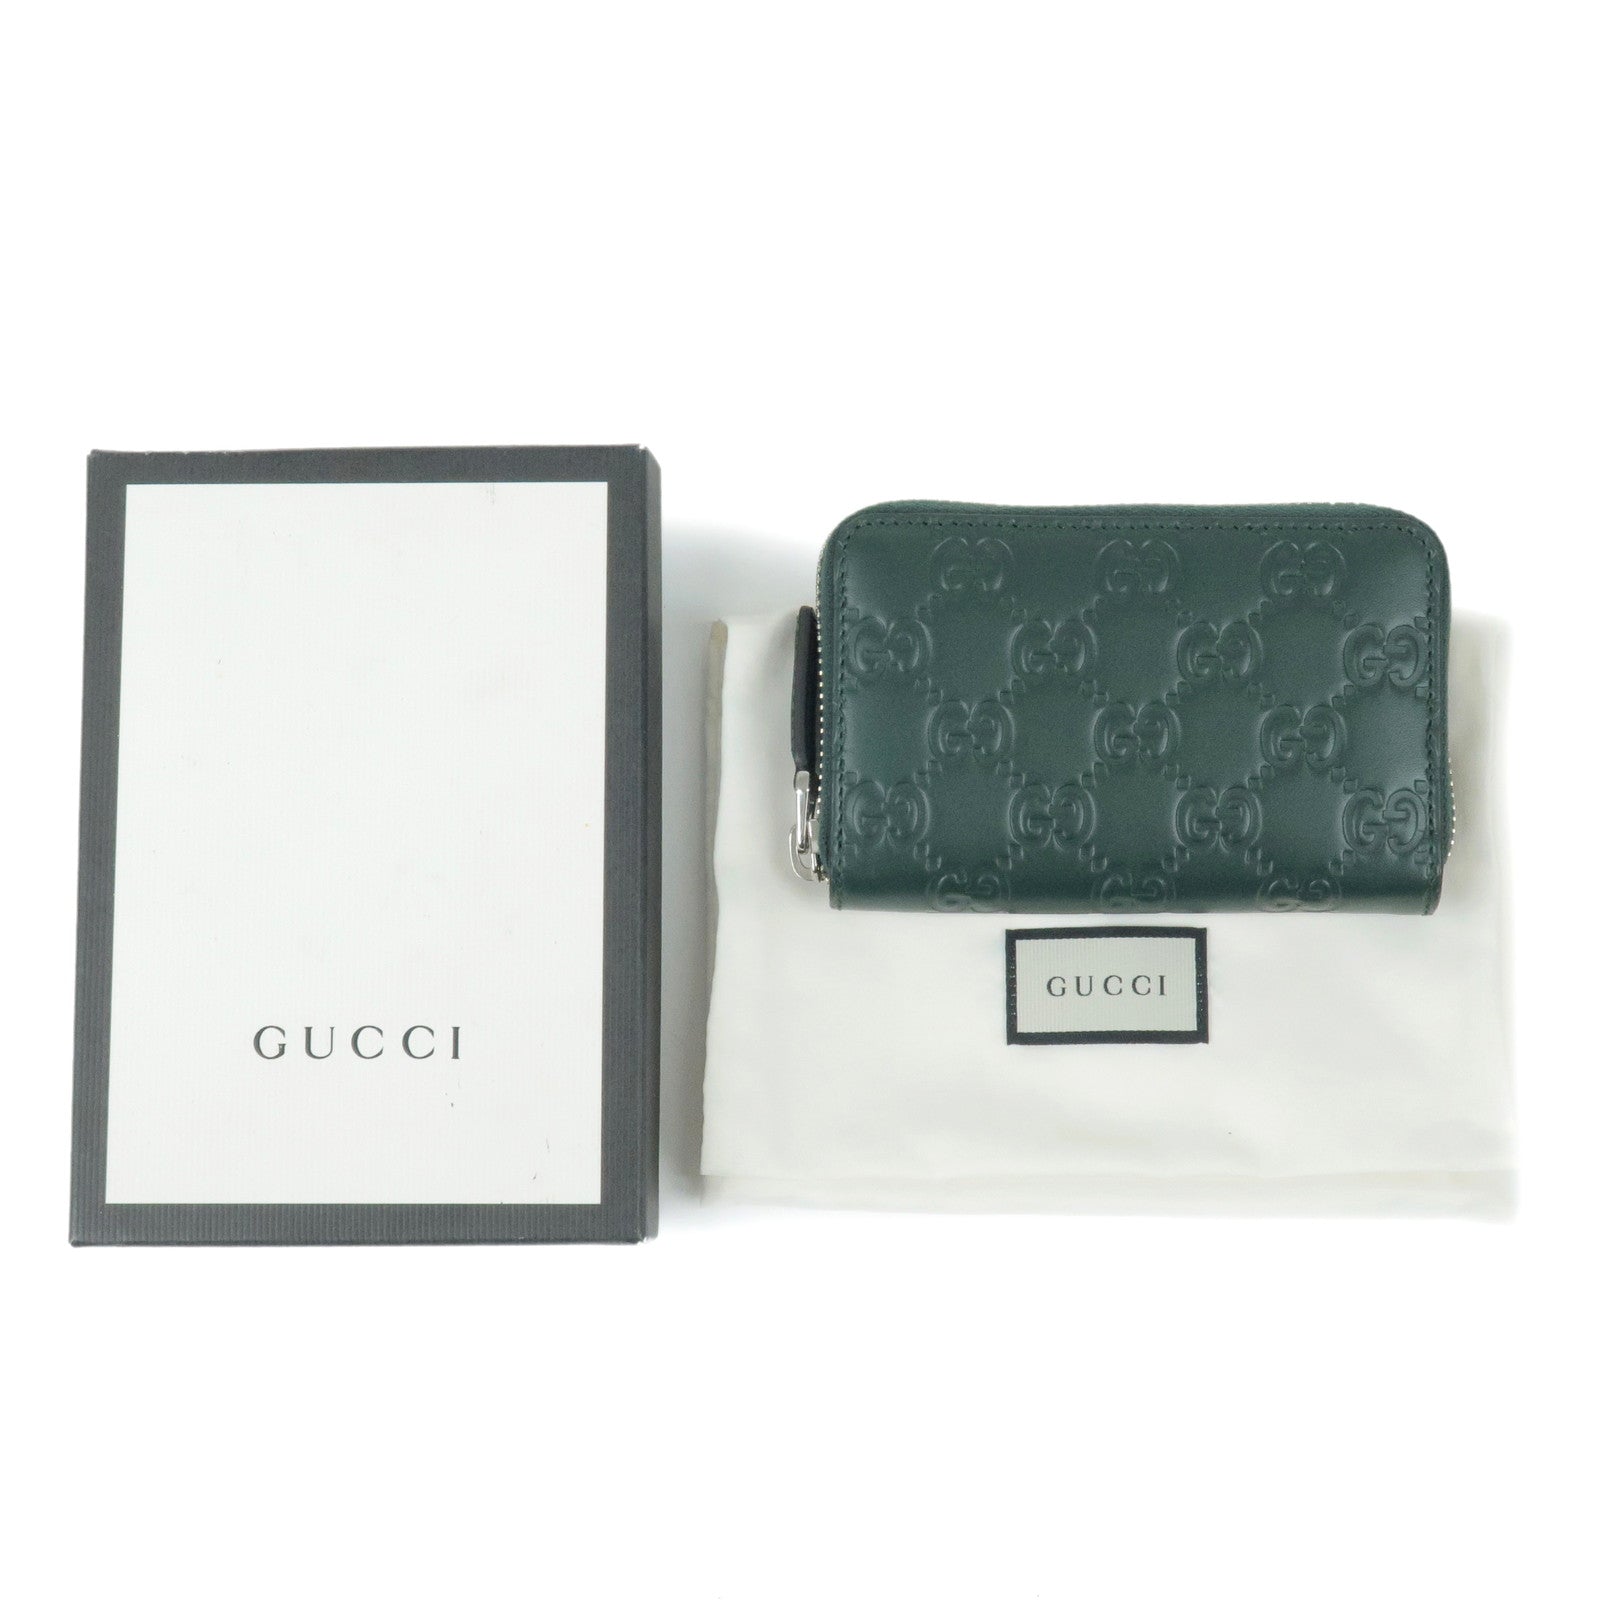 GUCCI VINTAGE MICRO GUCCISSIMA GG MONOGRAM LEATHER WALLET INSIDE GREEN  ITALY